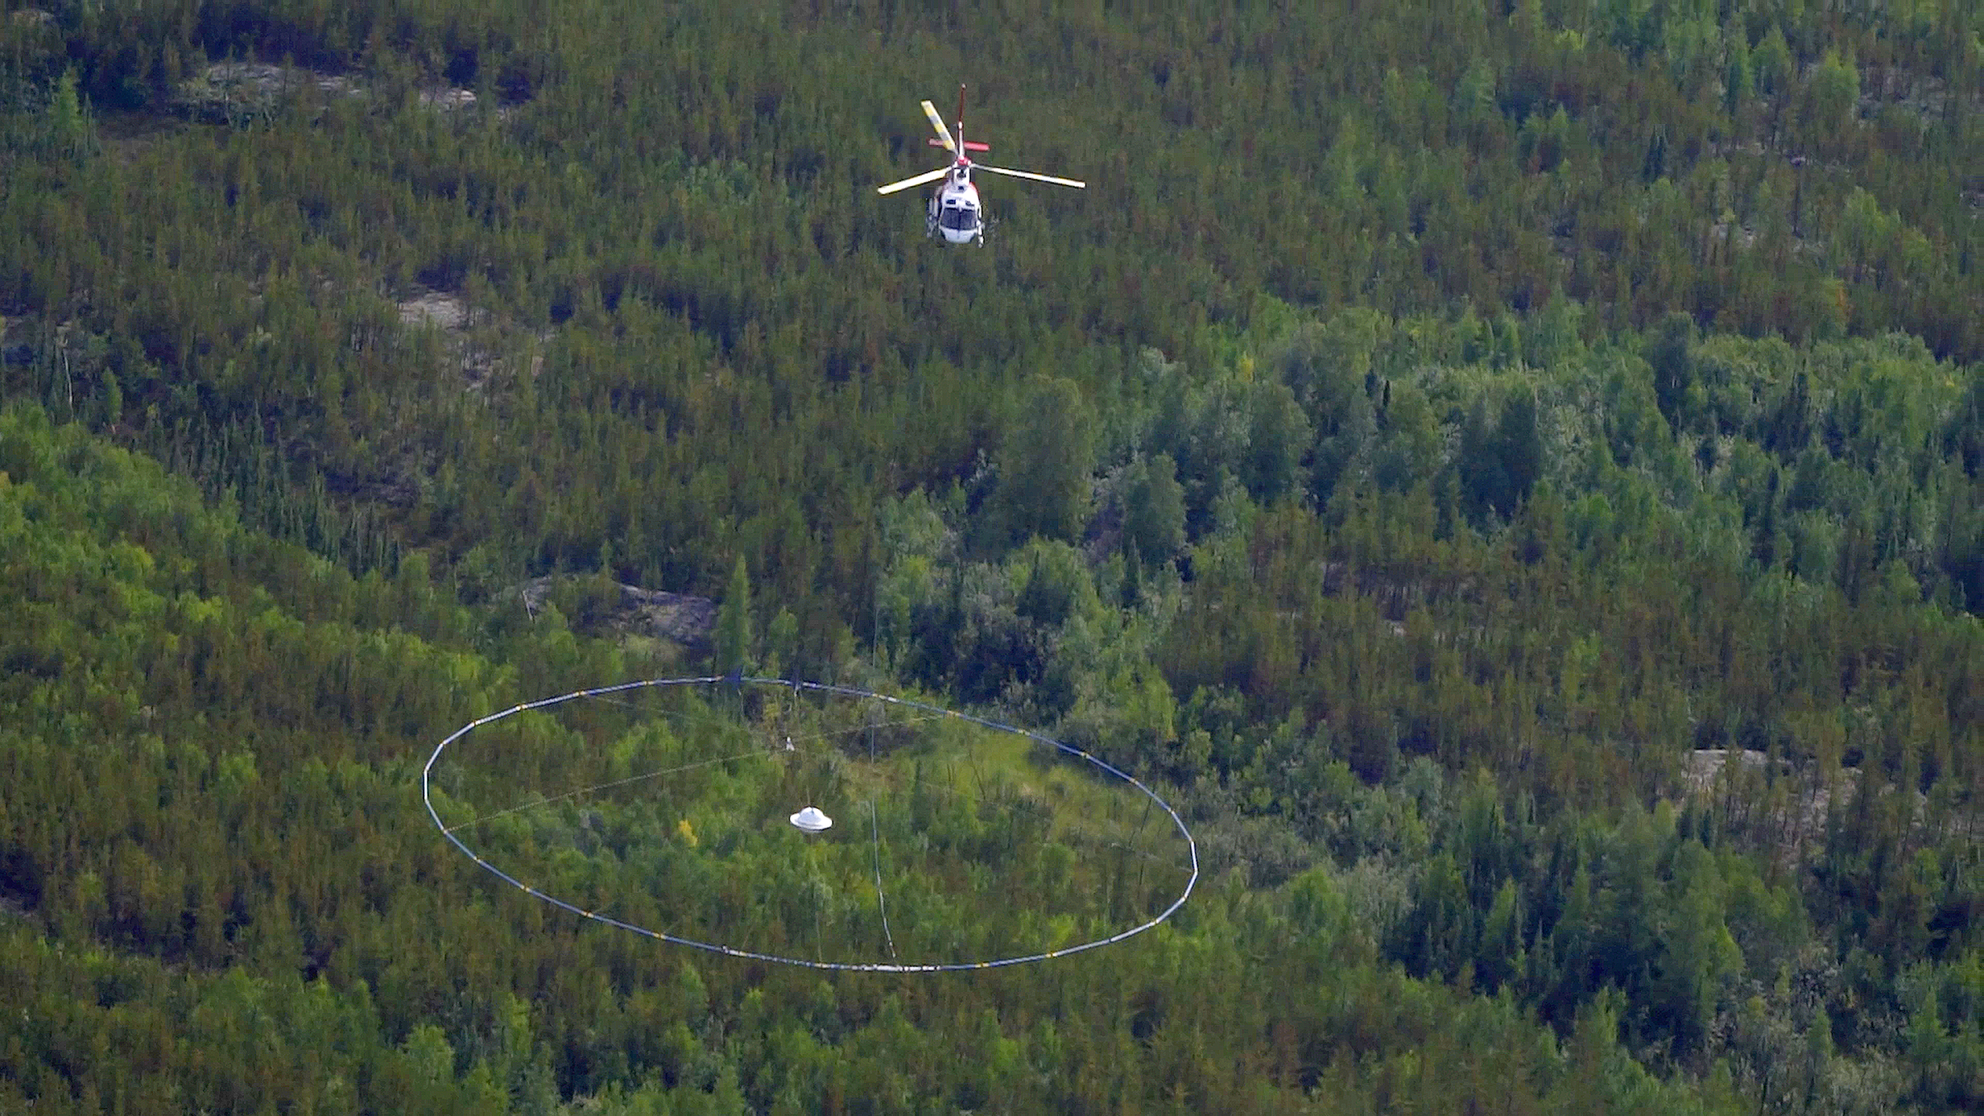 a-white-helicopter-carrying-a-large-loop-many-times-its-size-beneath-it-flies-over-an-evergreen-forest.png